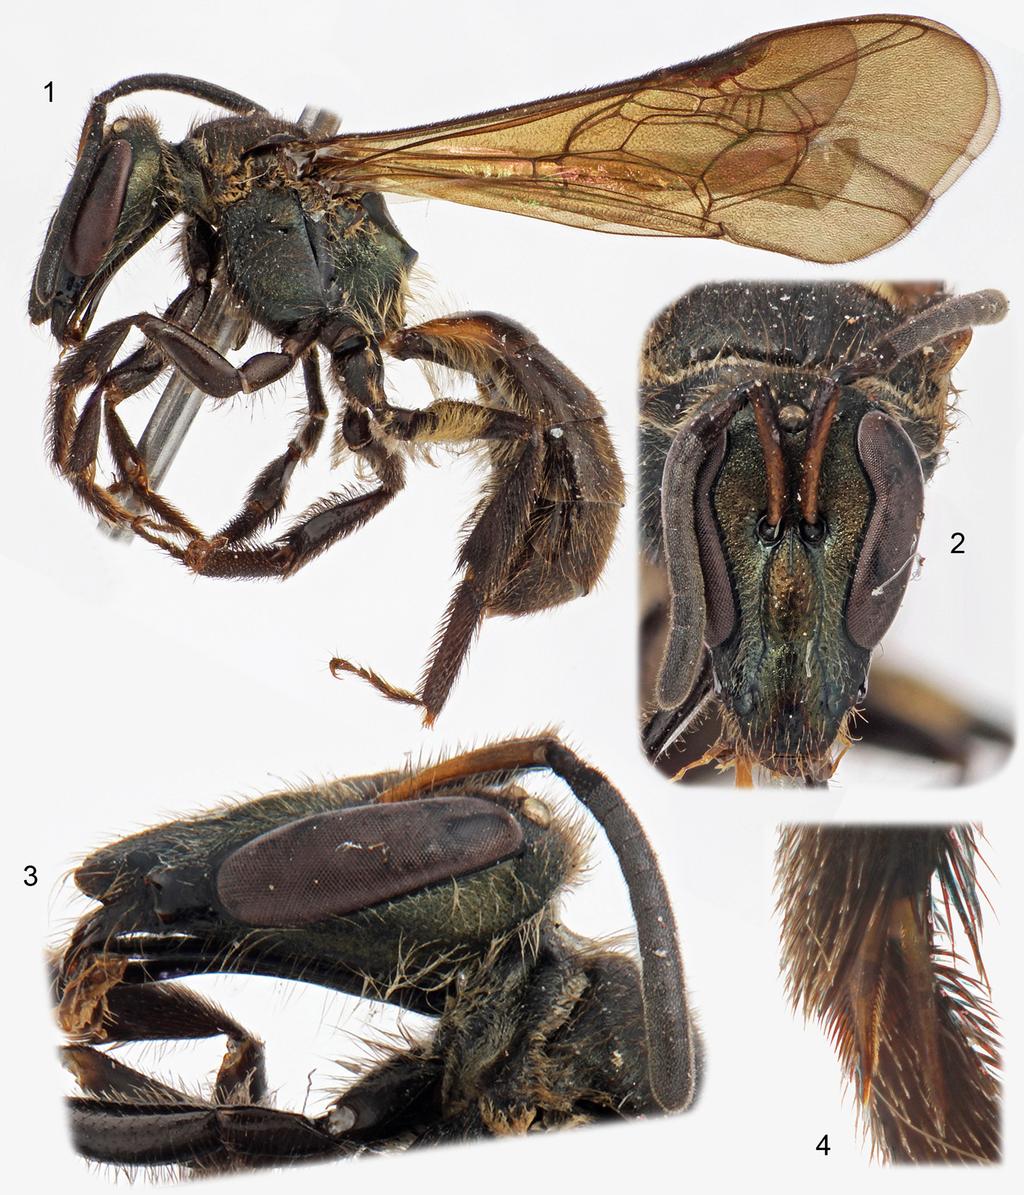 2013 Engel: A new Ischnomelissa from Peru 3 Figures 1 4. Photomicrographs of holotype female of Ischnomelissa lignopteryx, new species, from Abra Patricia Reserve, Peru. 1. Lateral habitus. 2.